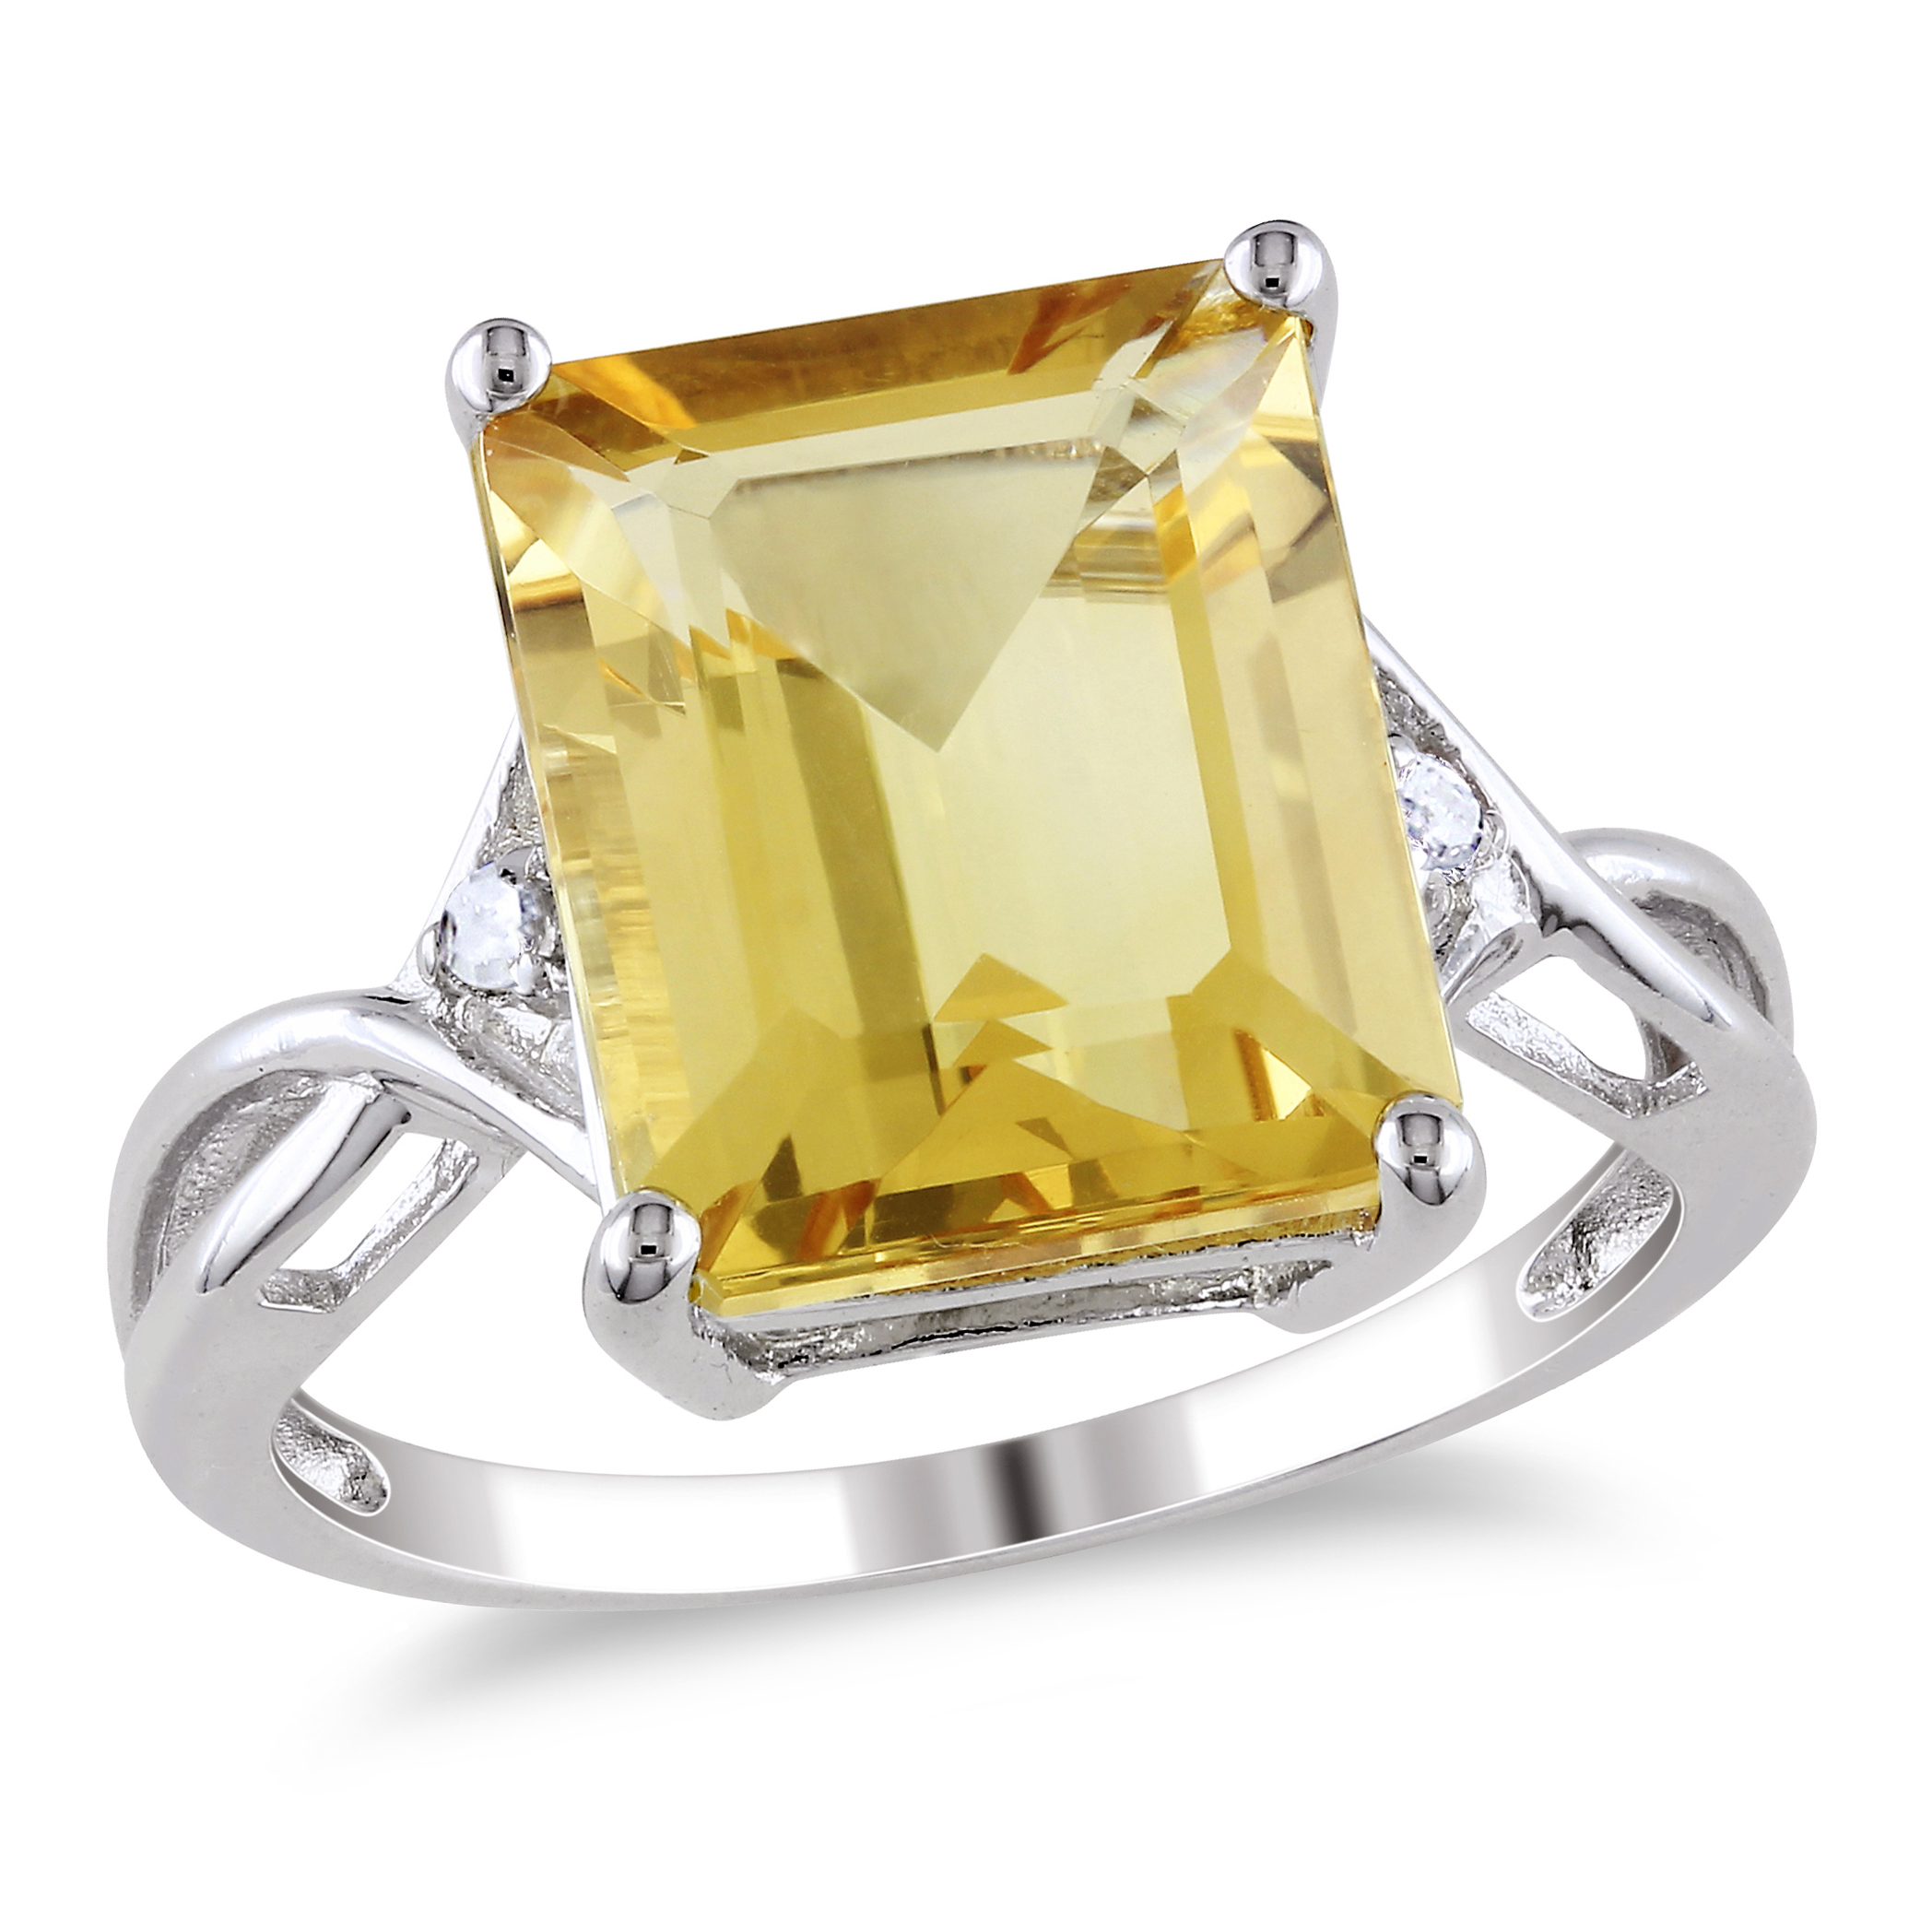 6 5/8 CT TGW Emerald Cut Citrine and White Topaz Ring in Sterling Silver